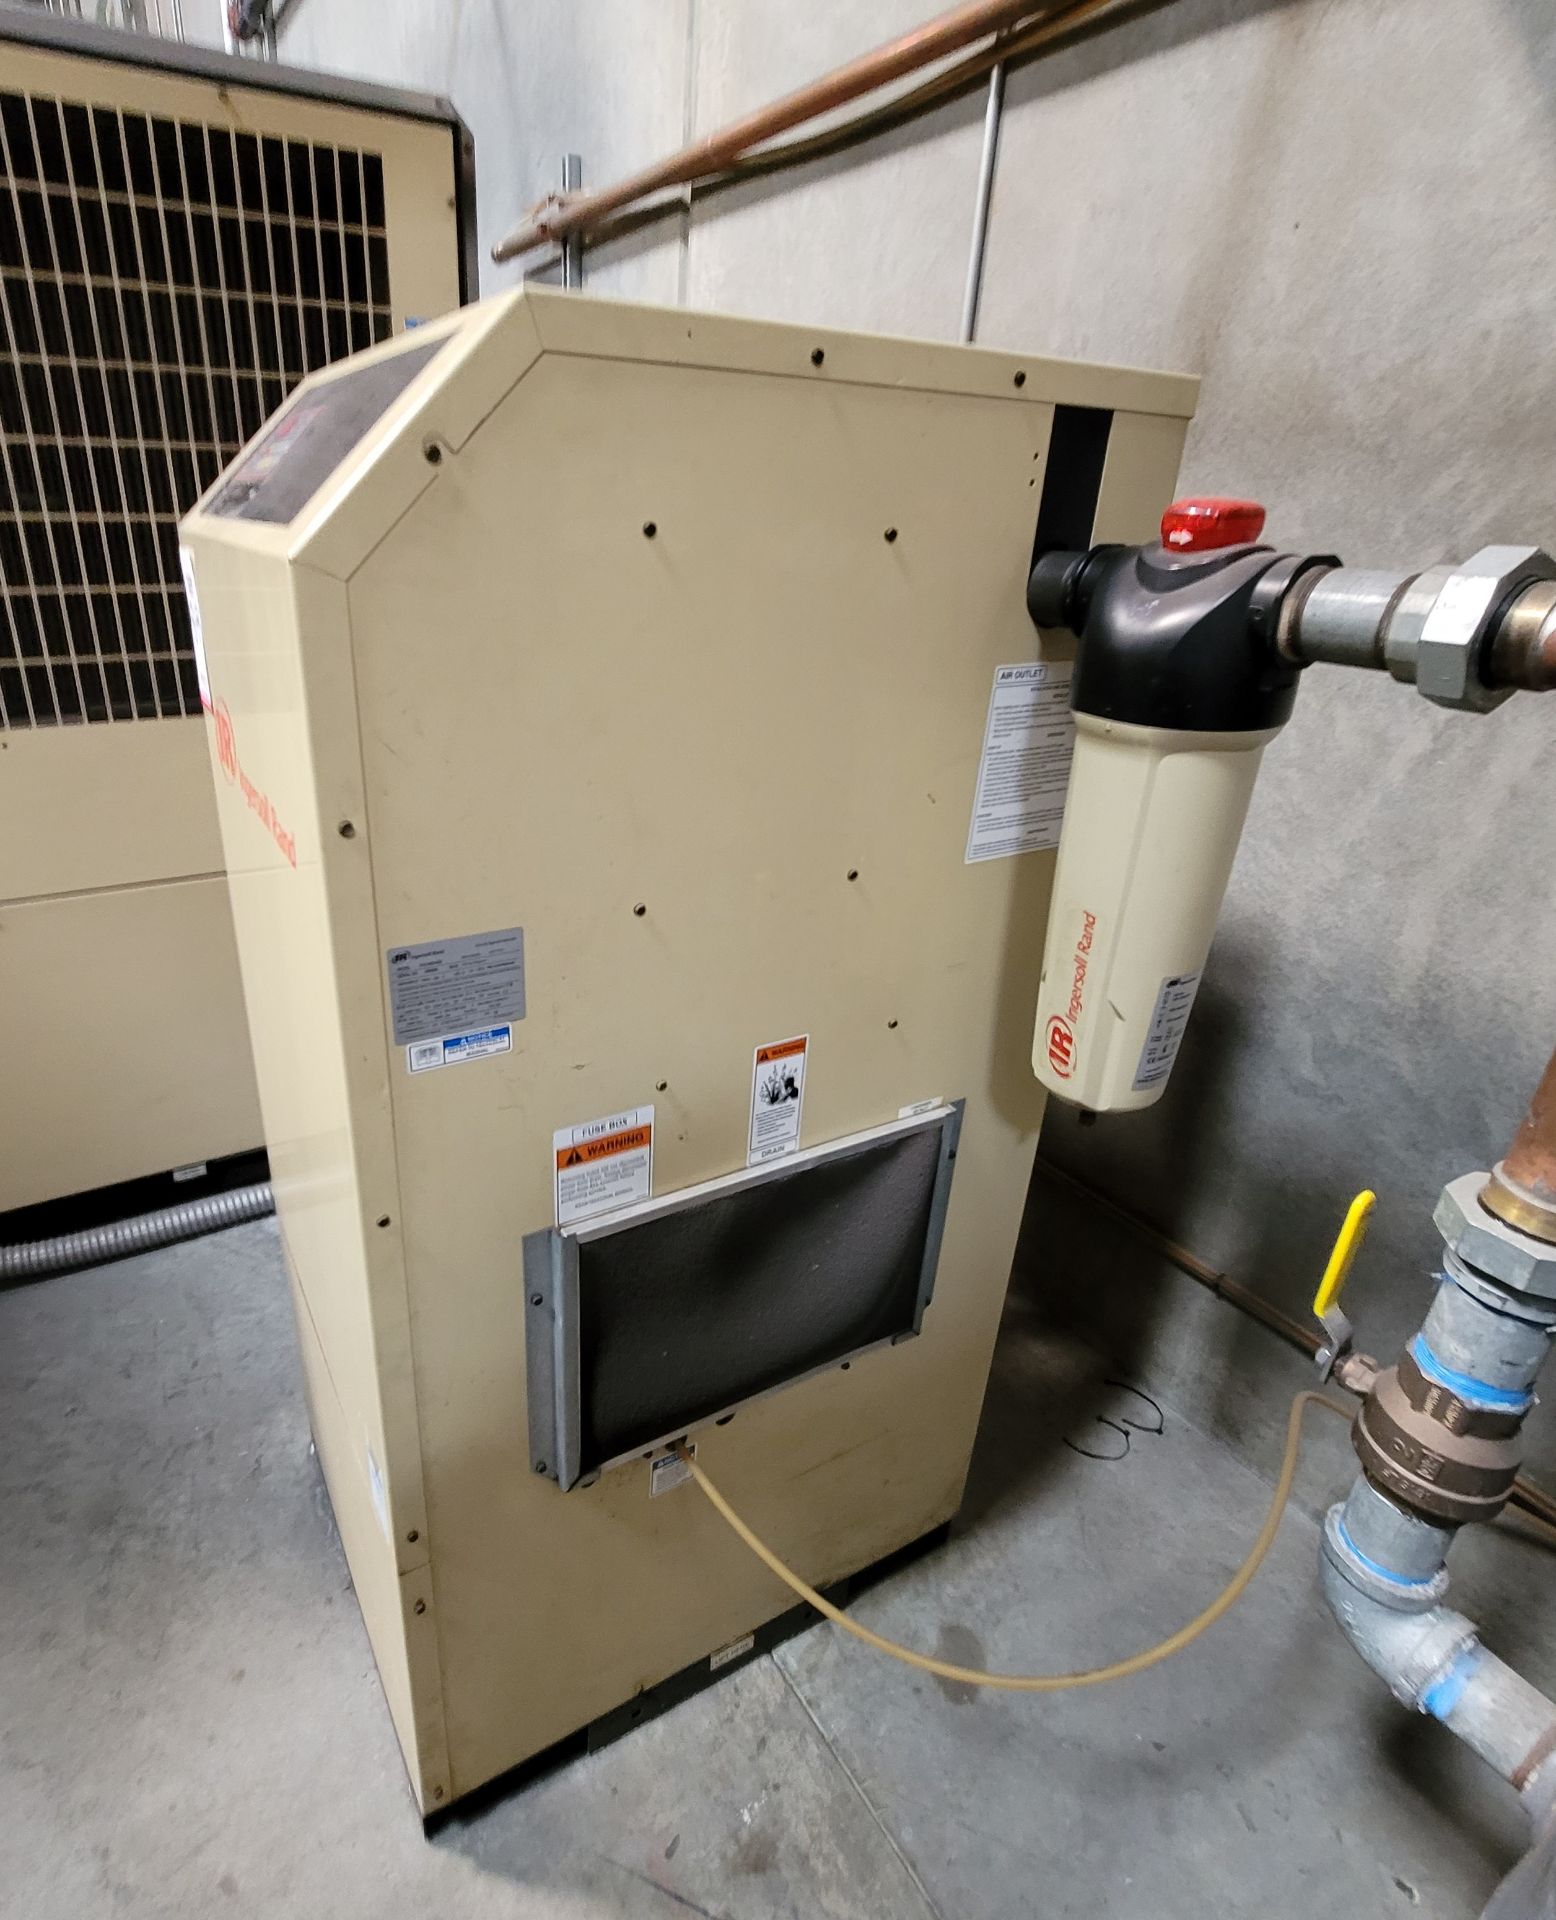 INGERSOLL-RAND REFRIGERATED AIR DRYER, MODEL NVC400A400, S/N 494564 - Image 2 of 3